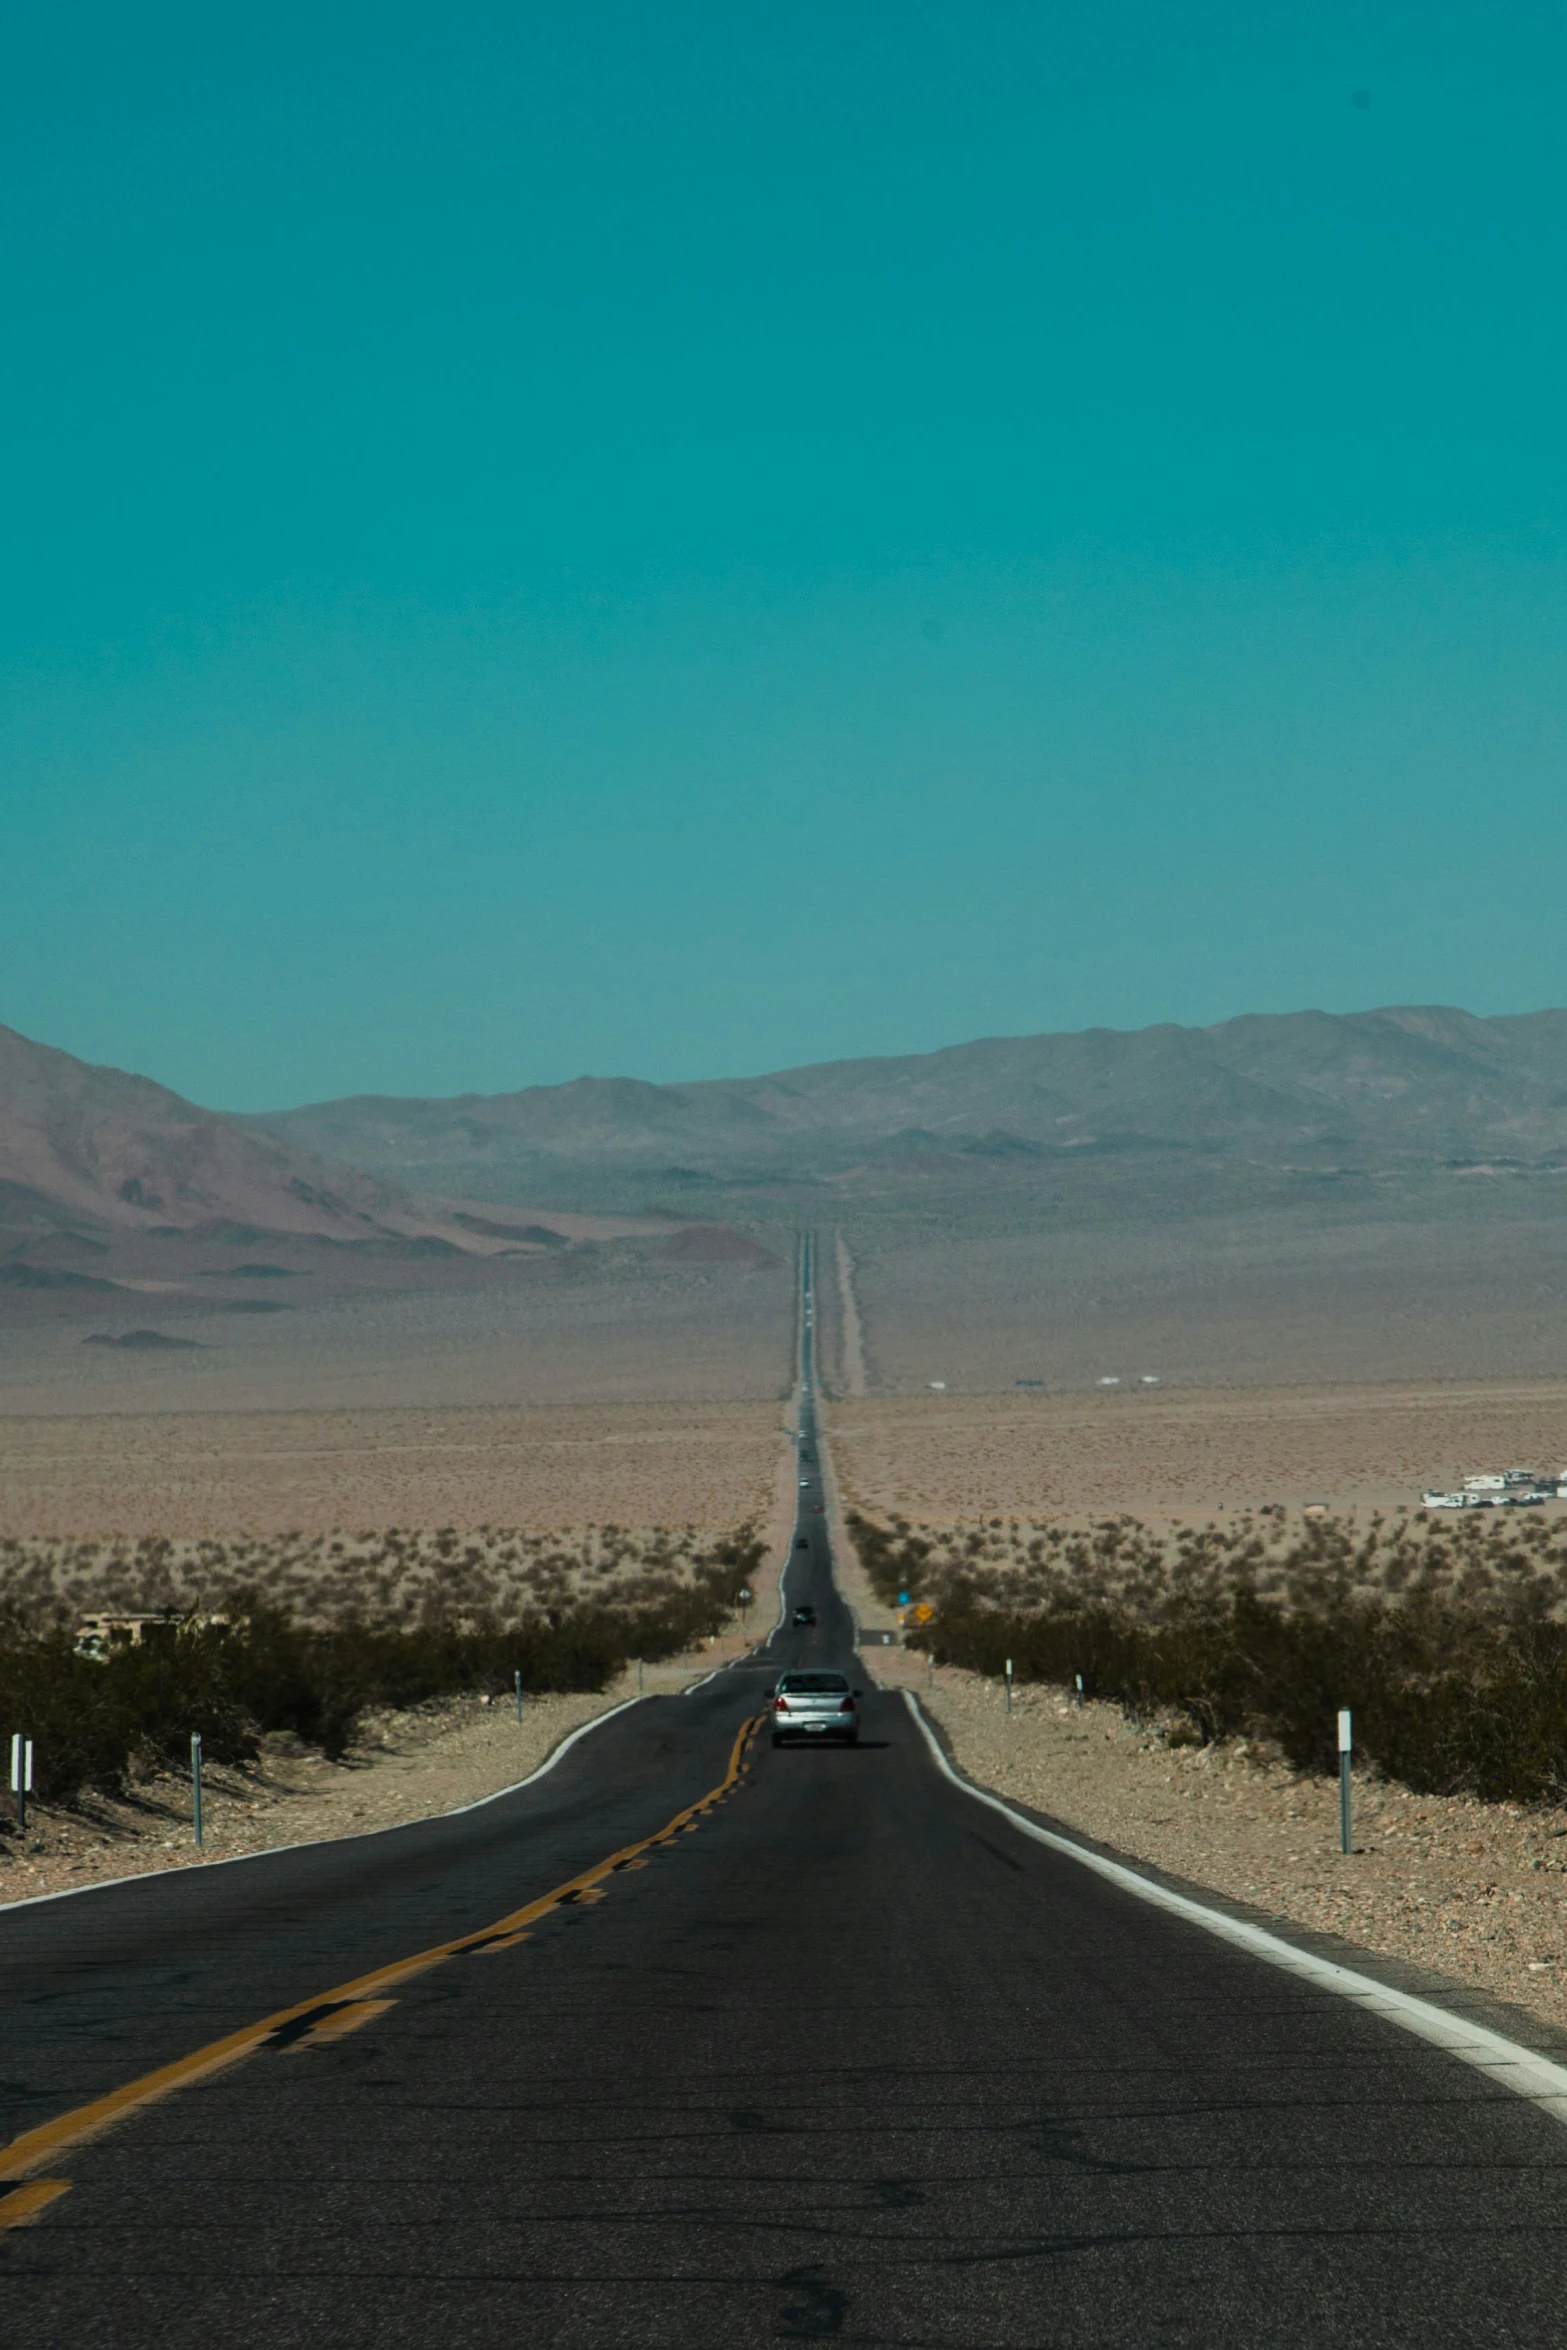 long highway in desert with mountains in the background